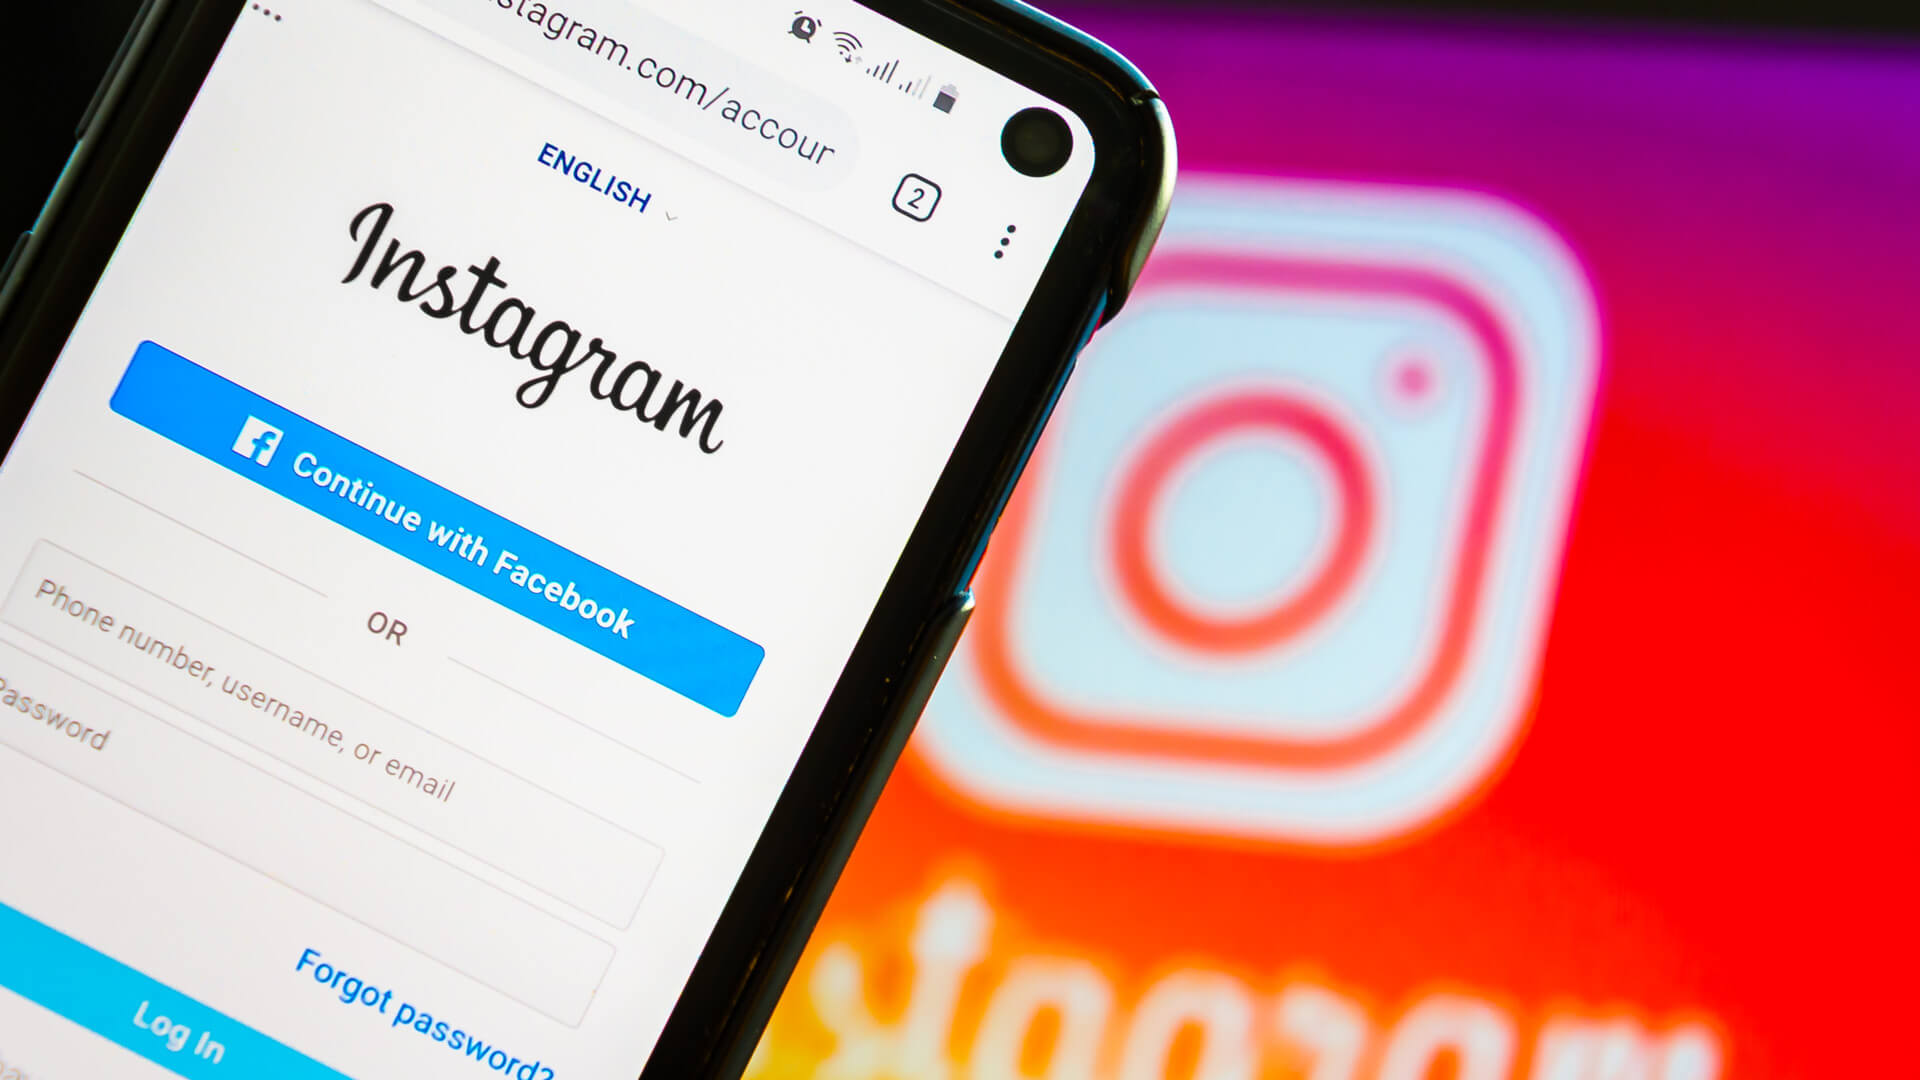 Instagram tests Multi-Advertiser ads, cramming four ads into one screen